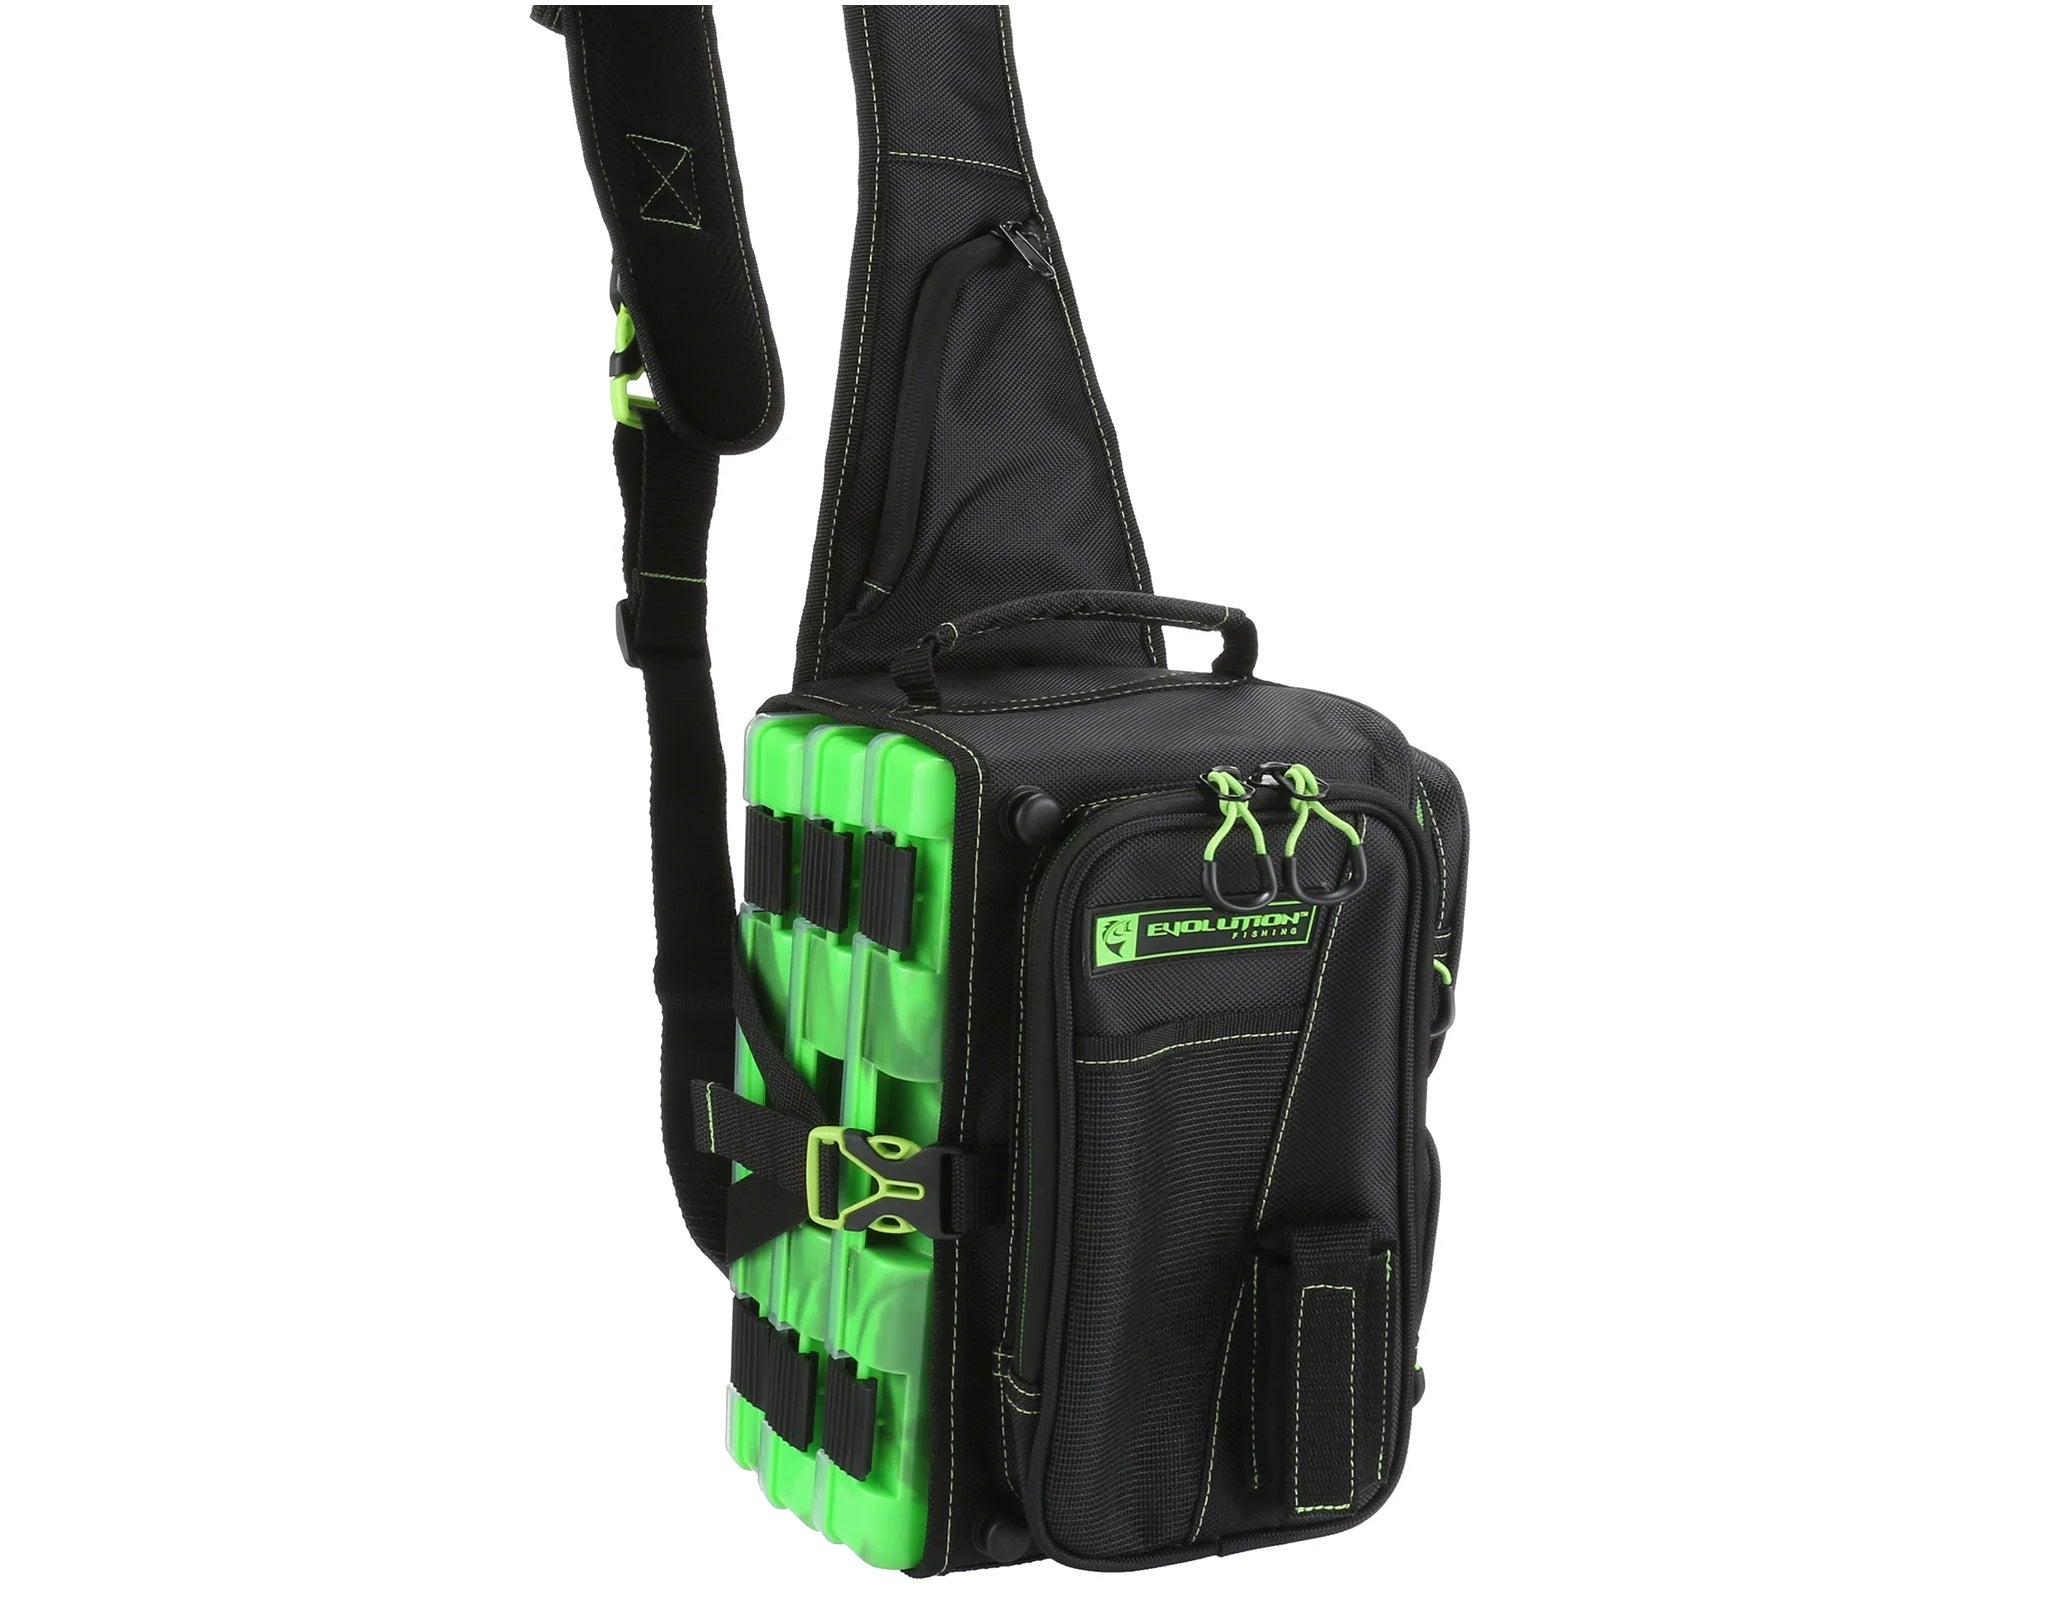 NEW Drift Series 3600 Tackle Sling Pack from Evolution Outdoor